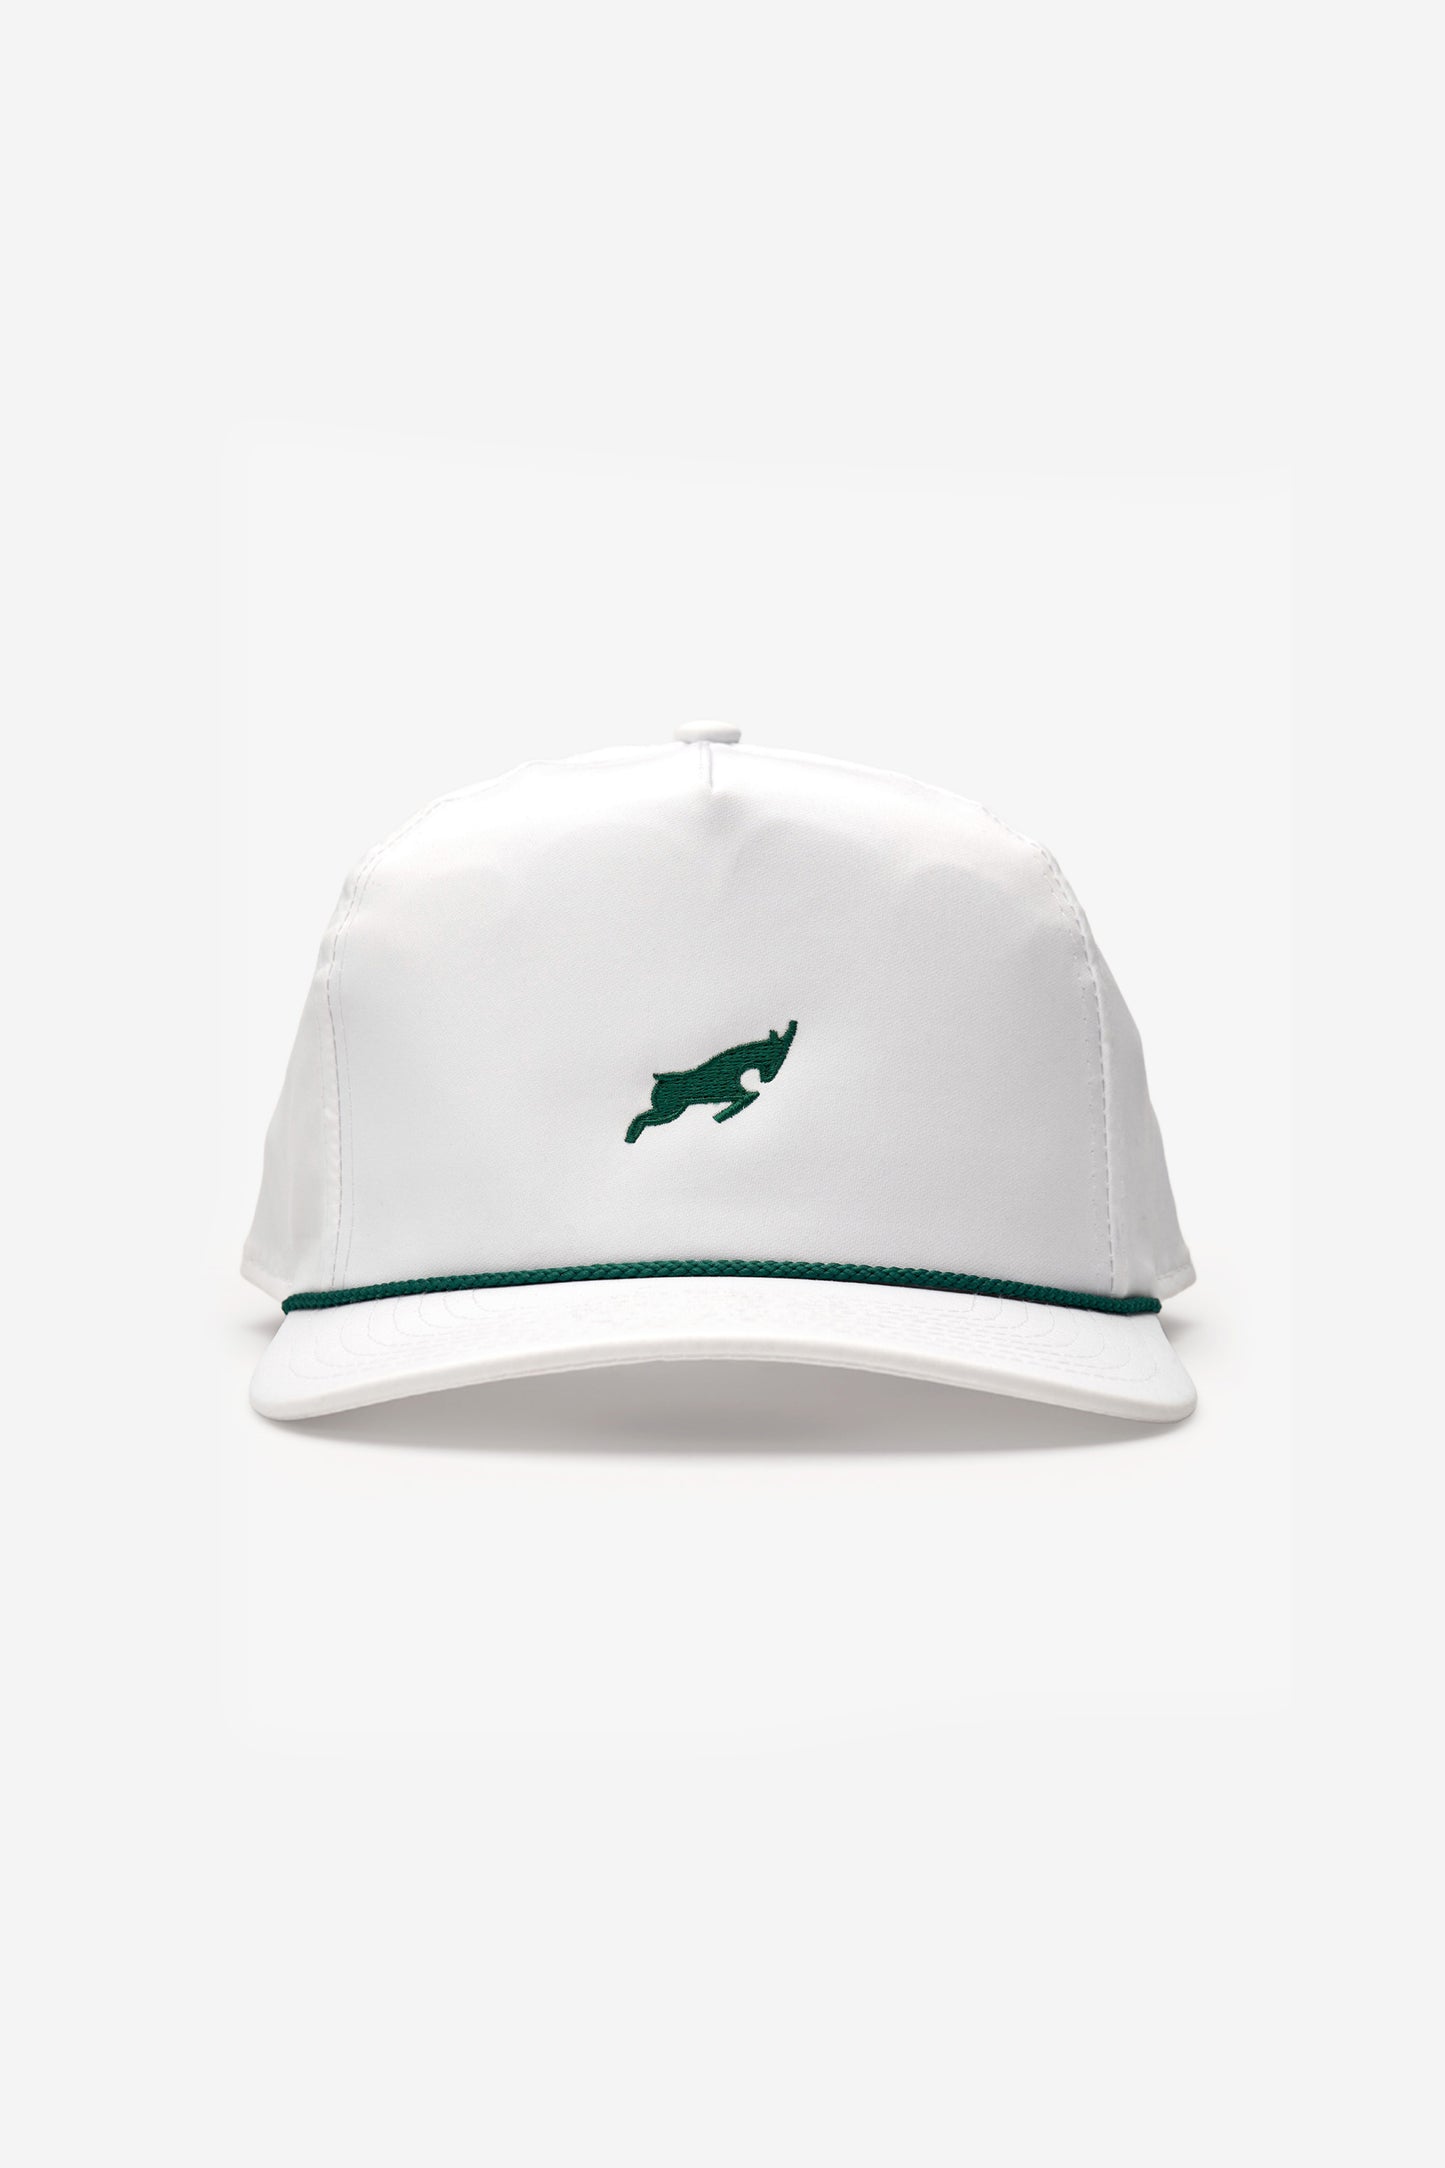 WHITE ROPE HAT x GREEN GOAT